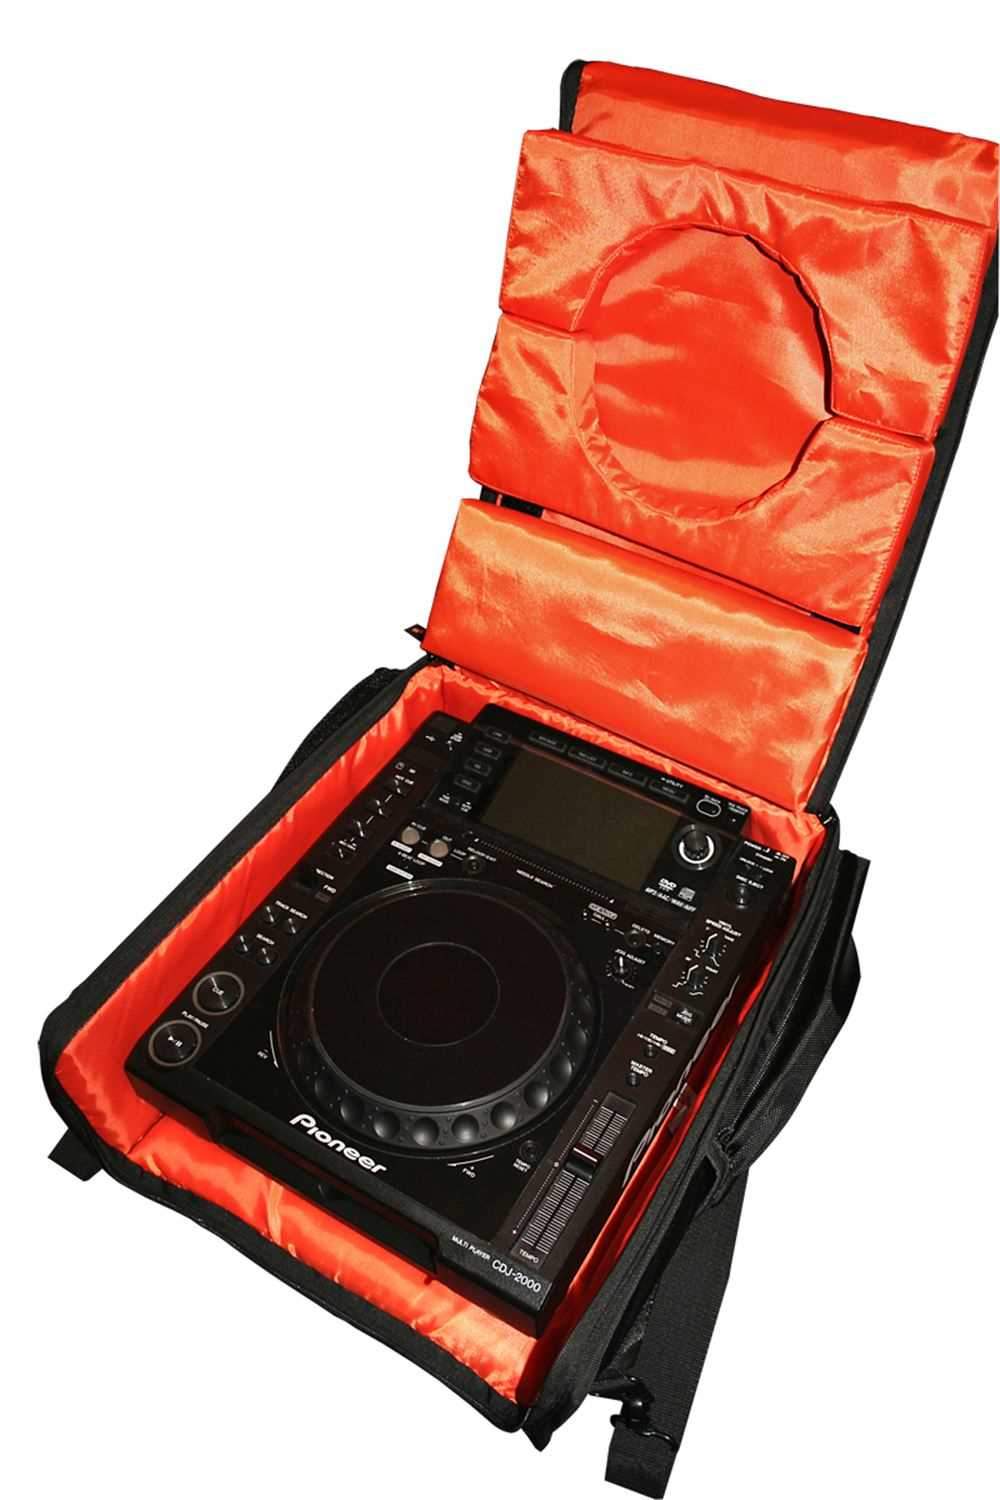 Gator G-CLUB CDMX-12 DJ Bag for Large CD Players or 12" Mixers - PSSL ProSound and Stage Lighting